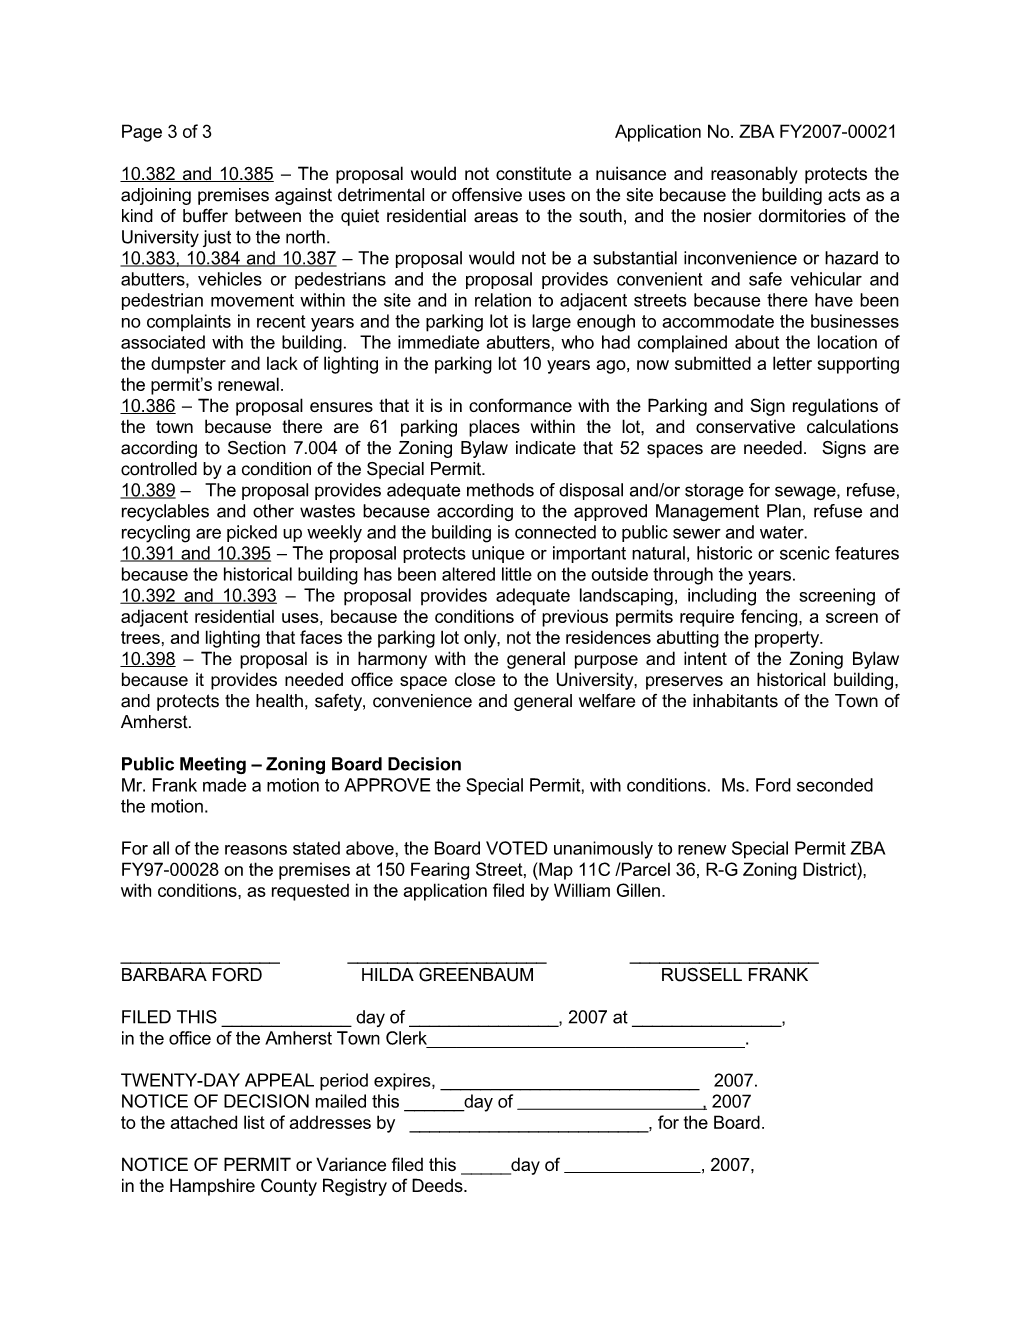 Page 1 of 3 Application No. ZBA FY2007-00021